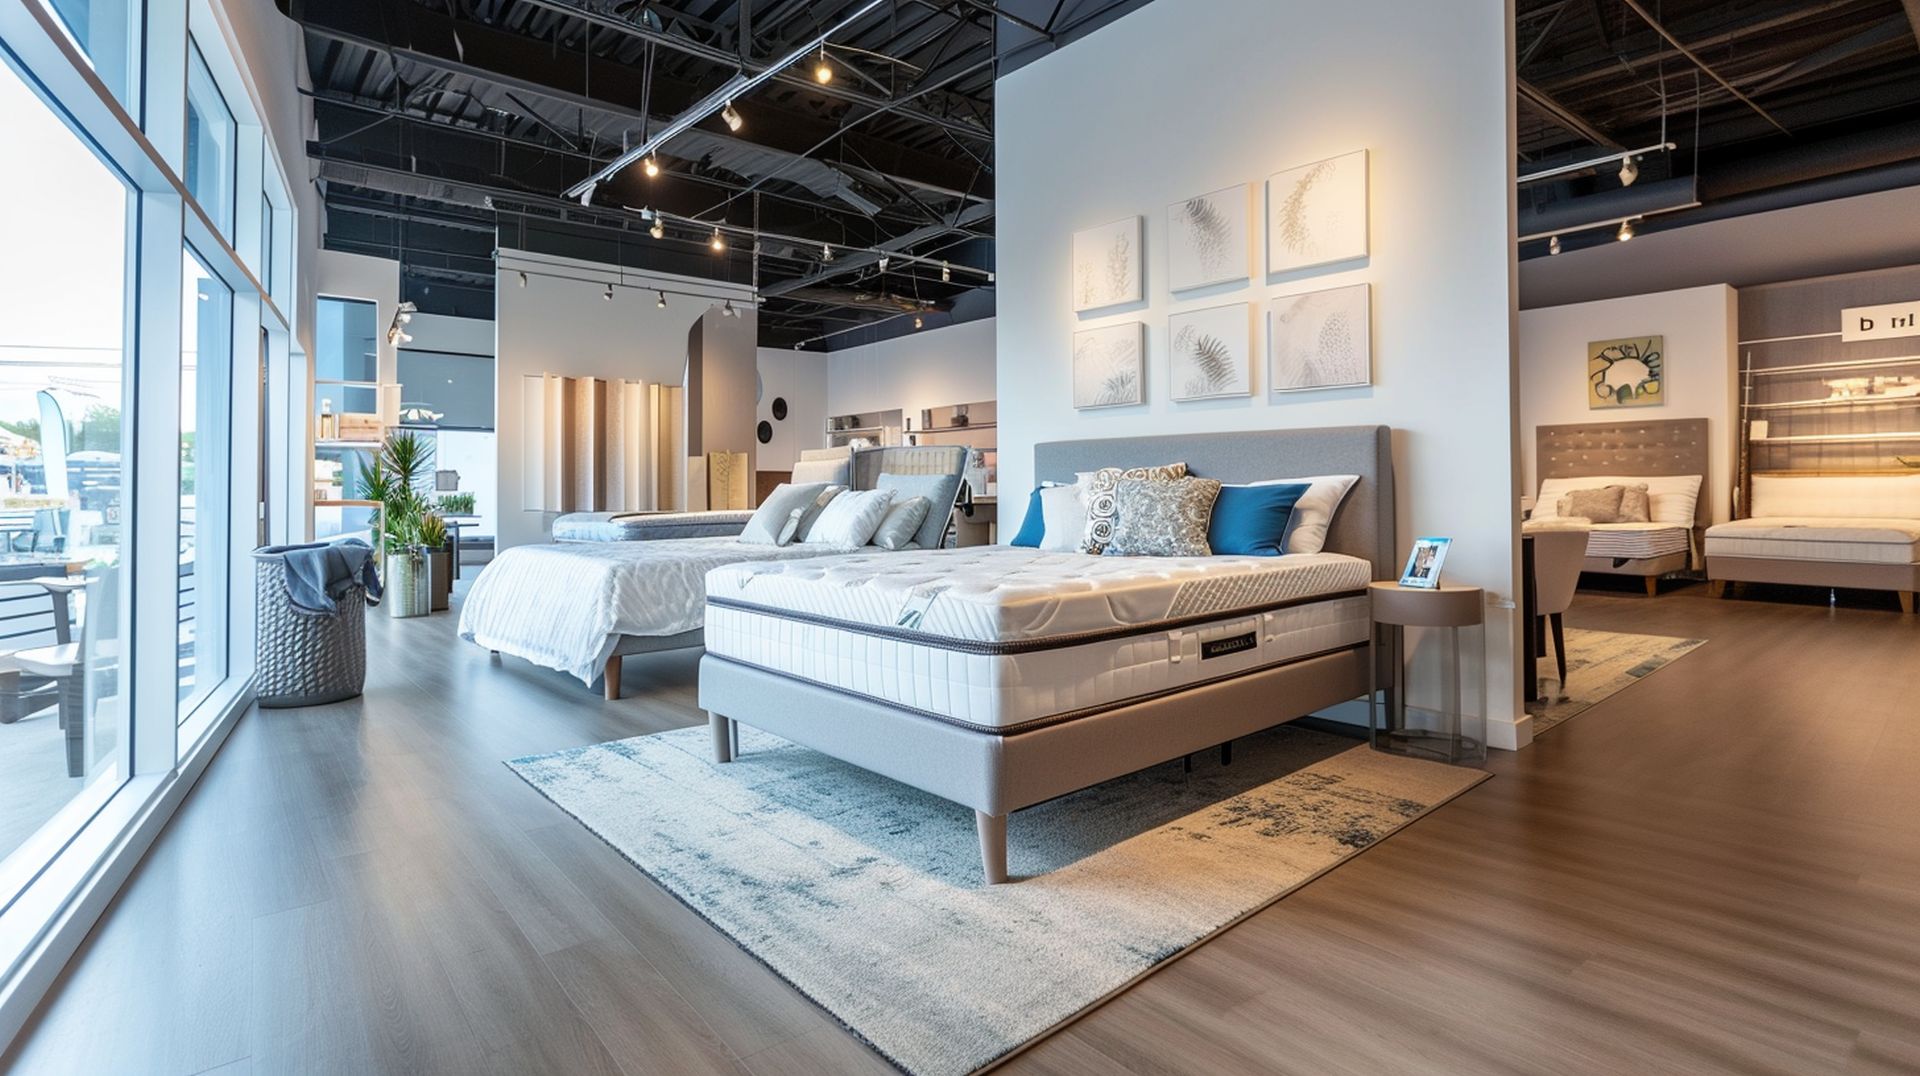 Types of mattresses at mattress dealers in Yucaipa, CA